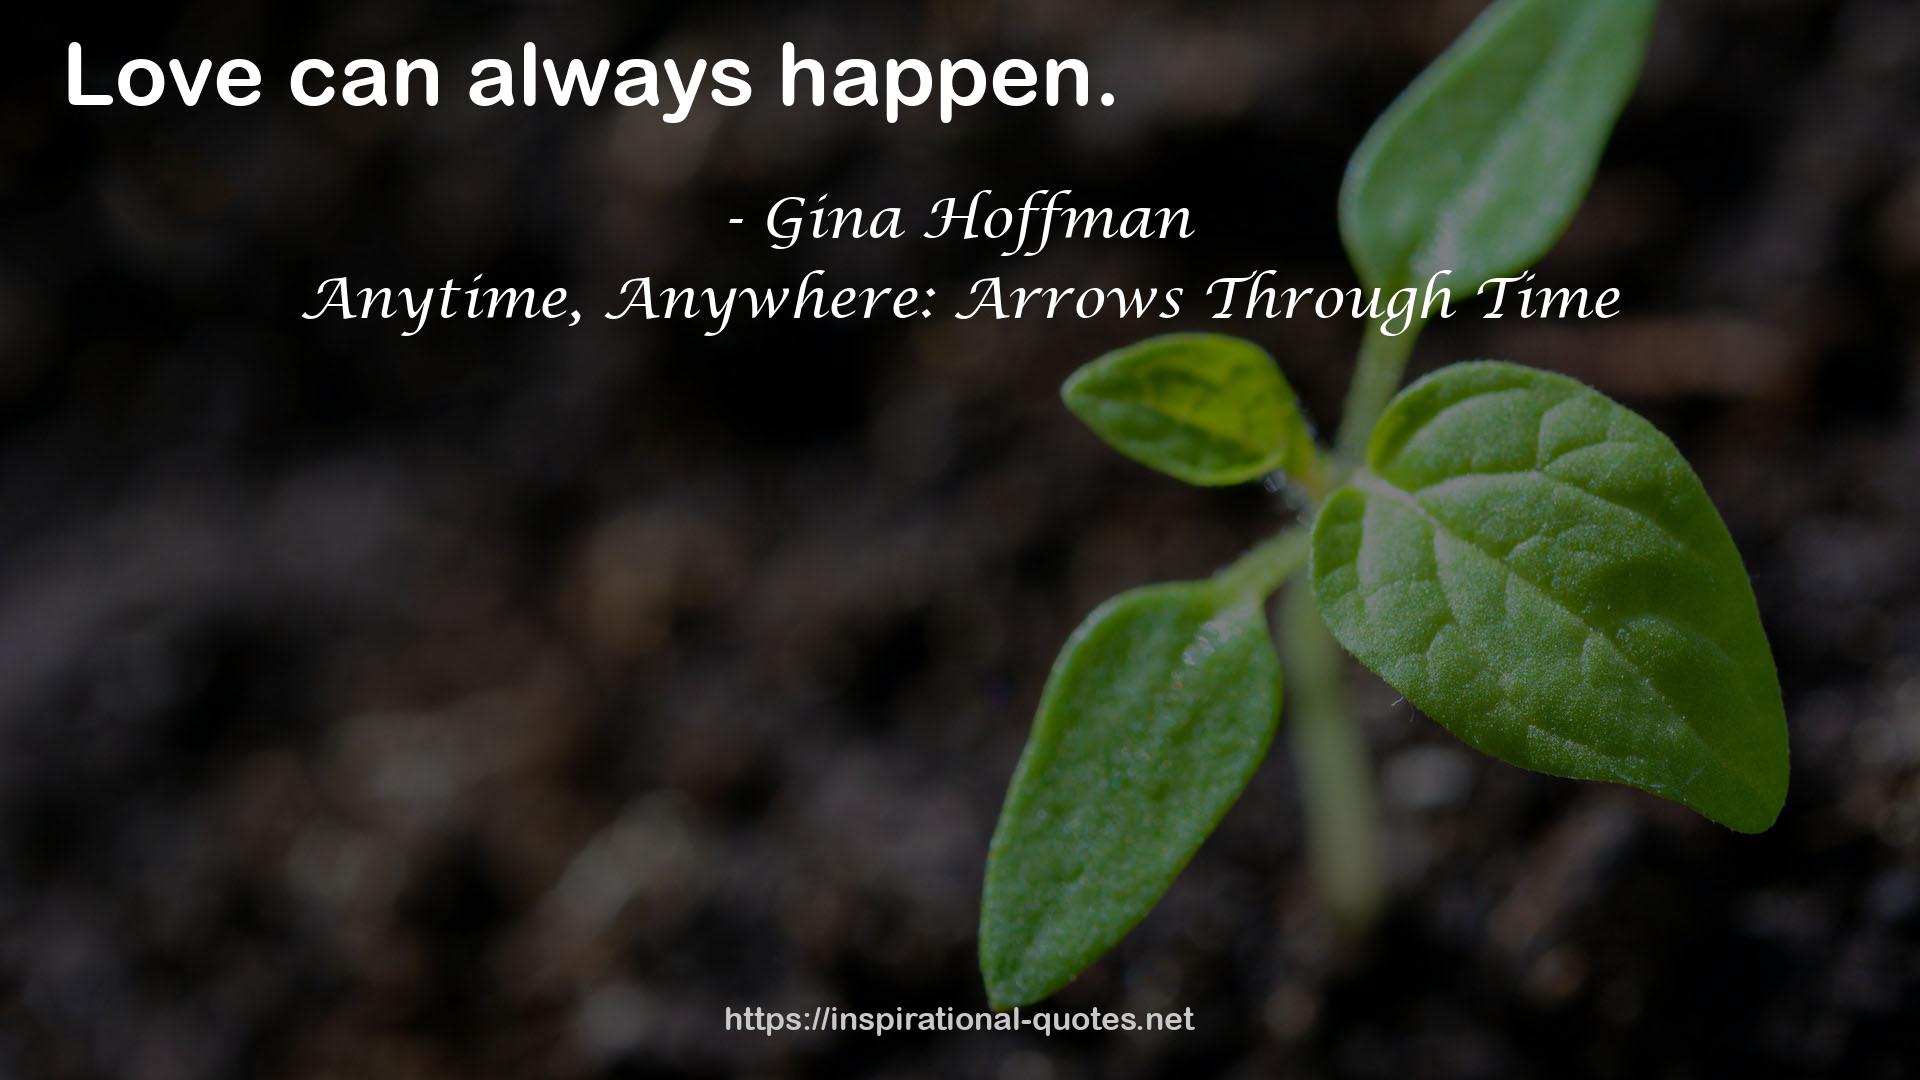 Anytime, Anywhere: Arrows Through Time QUOTES